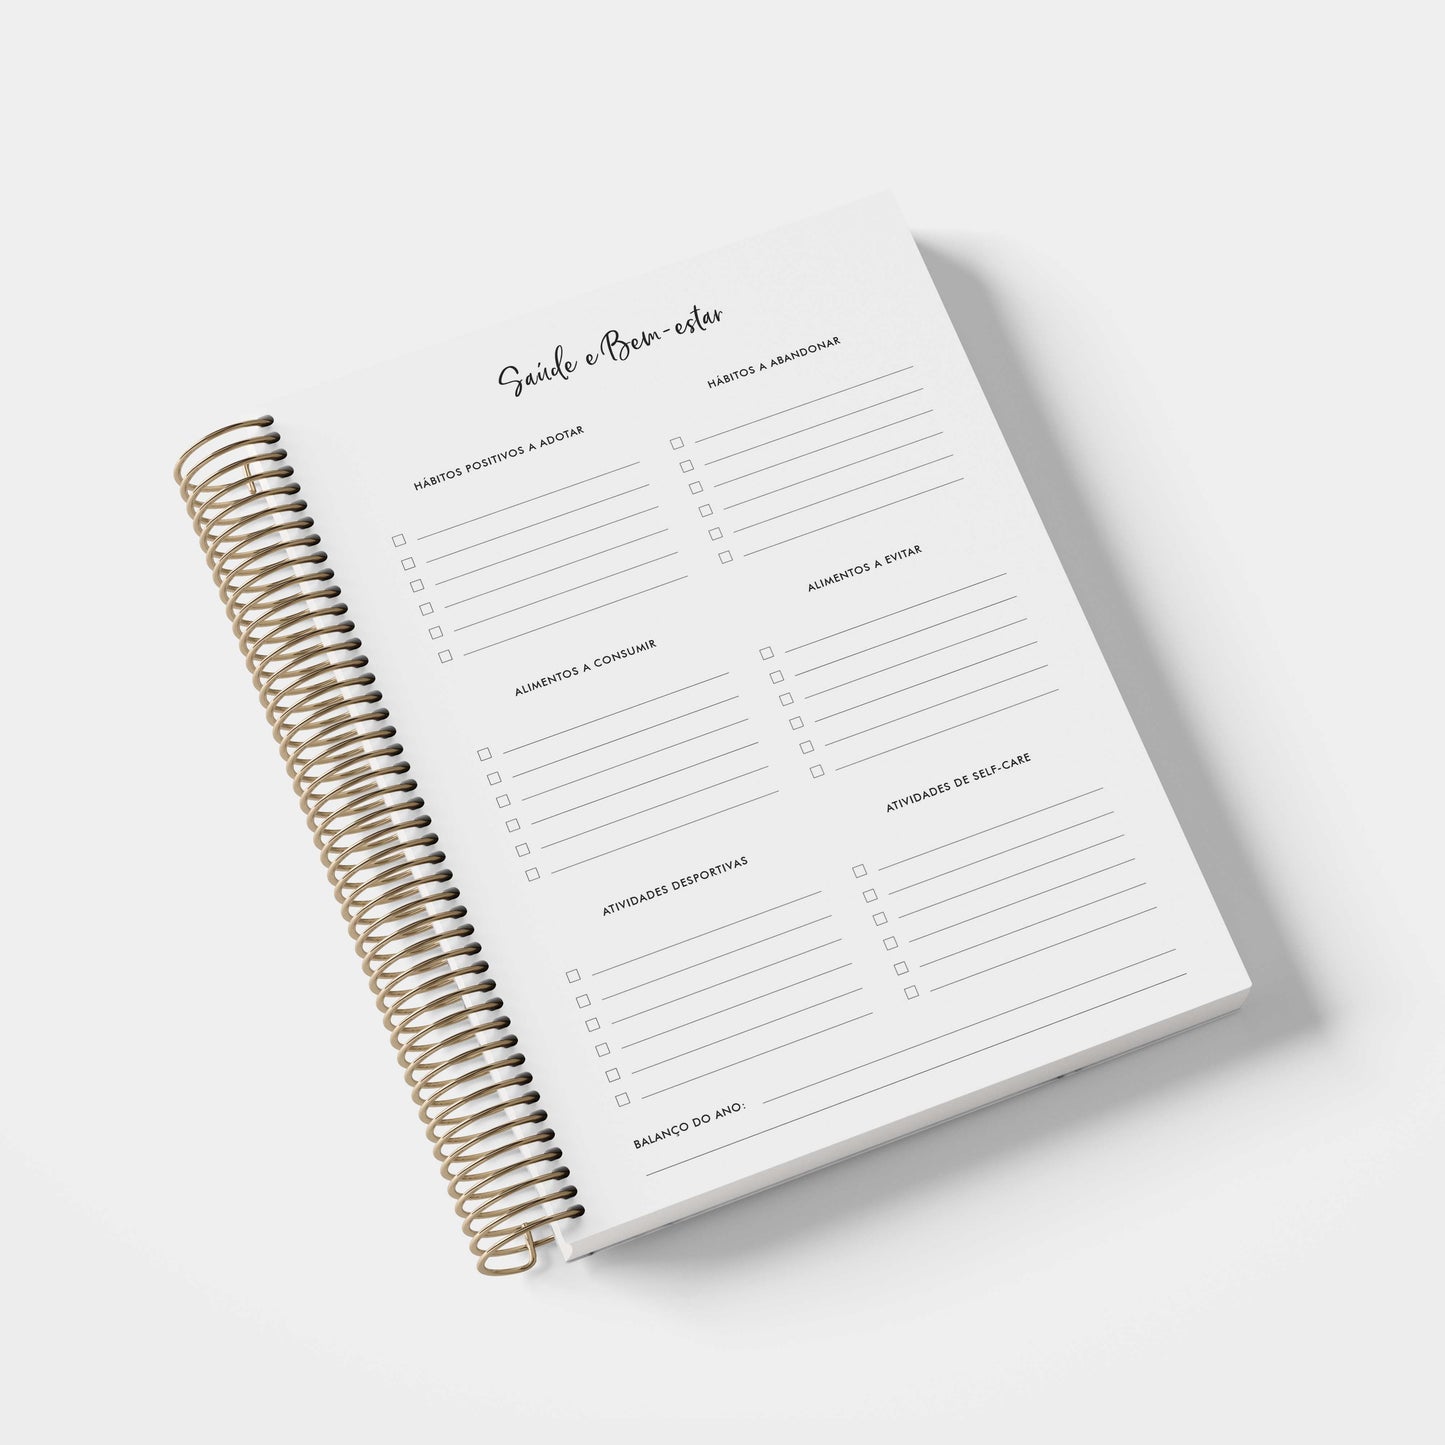 BOSS BABE + HANDMADE DOTS | LIFE PLANNER 2024 * 12 MONTH AGENDA * ESPECIAL HOLIDAY SALE *